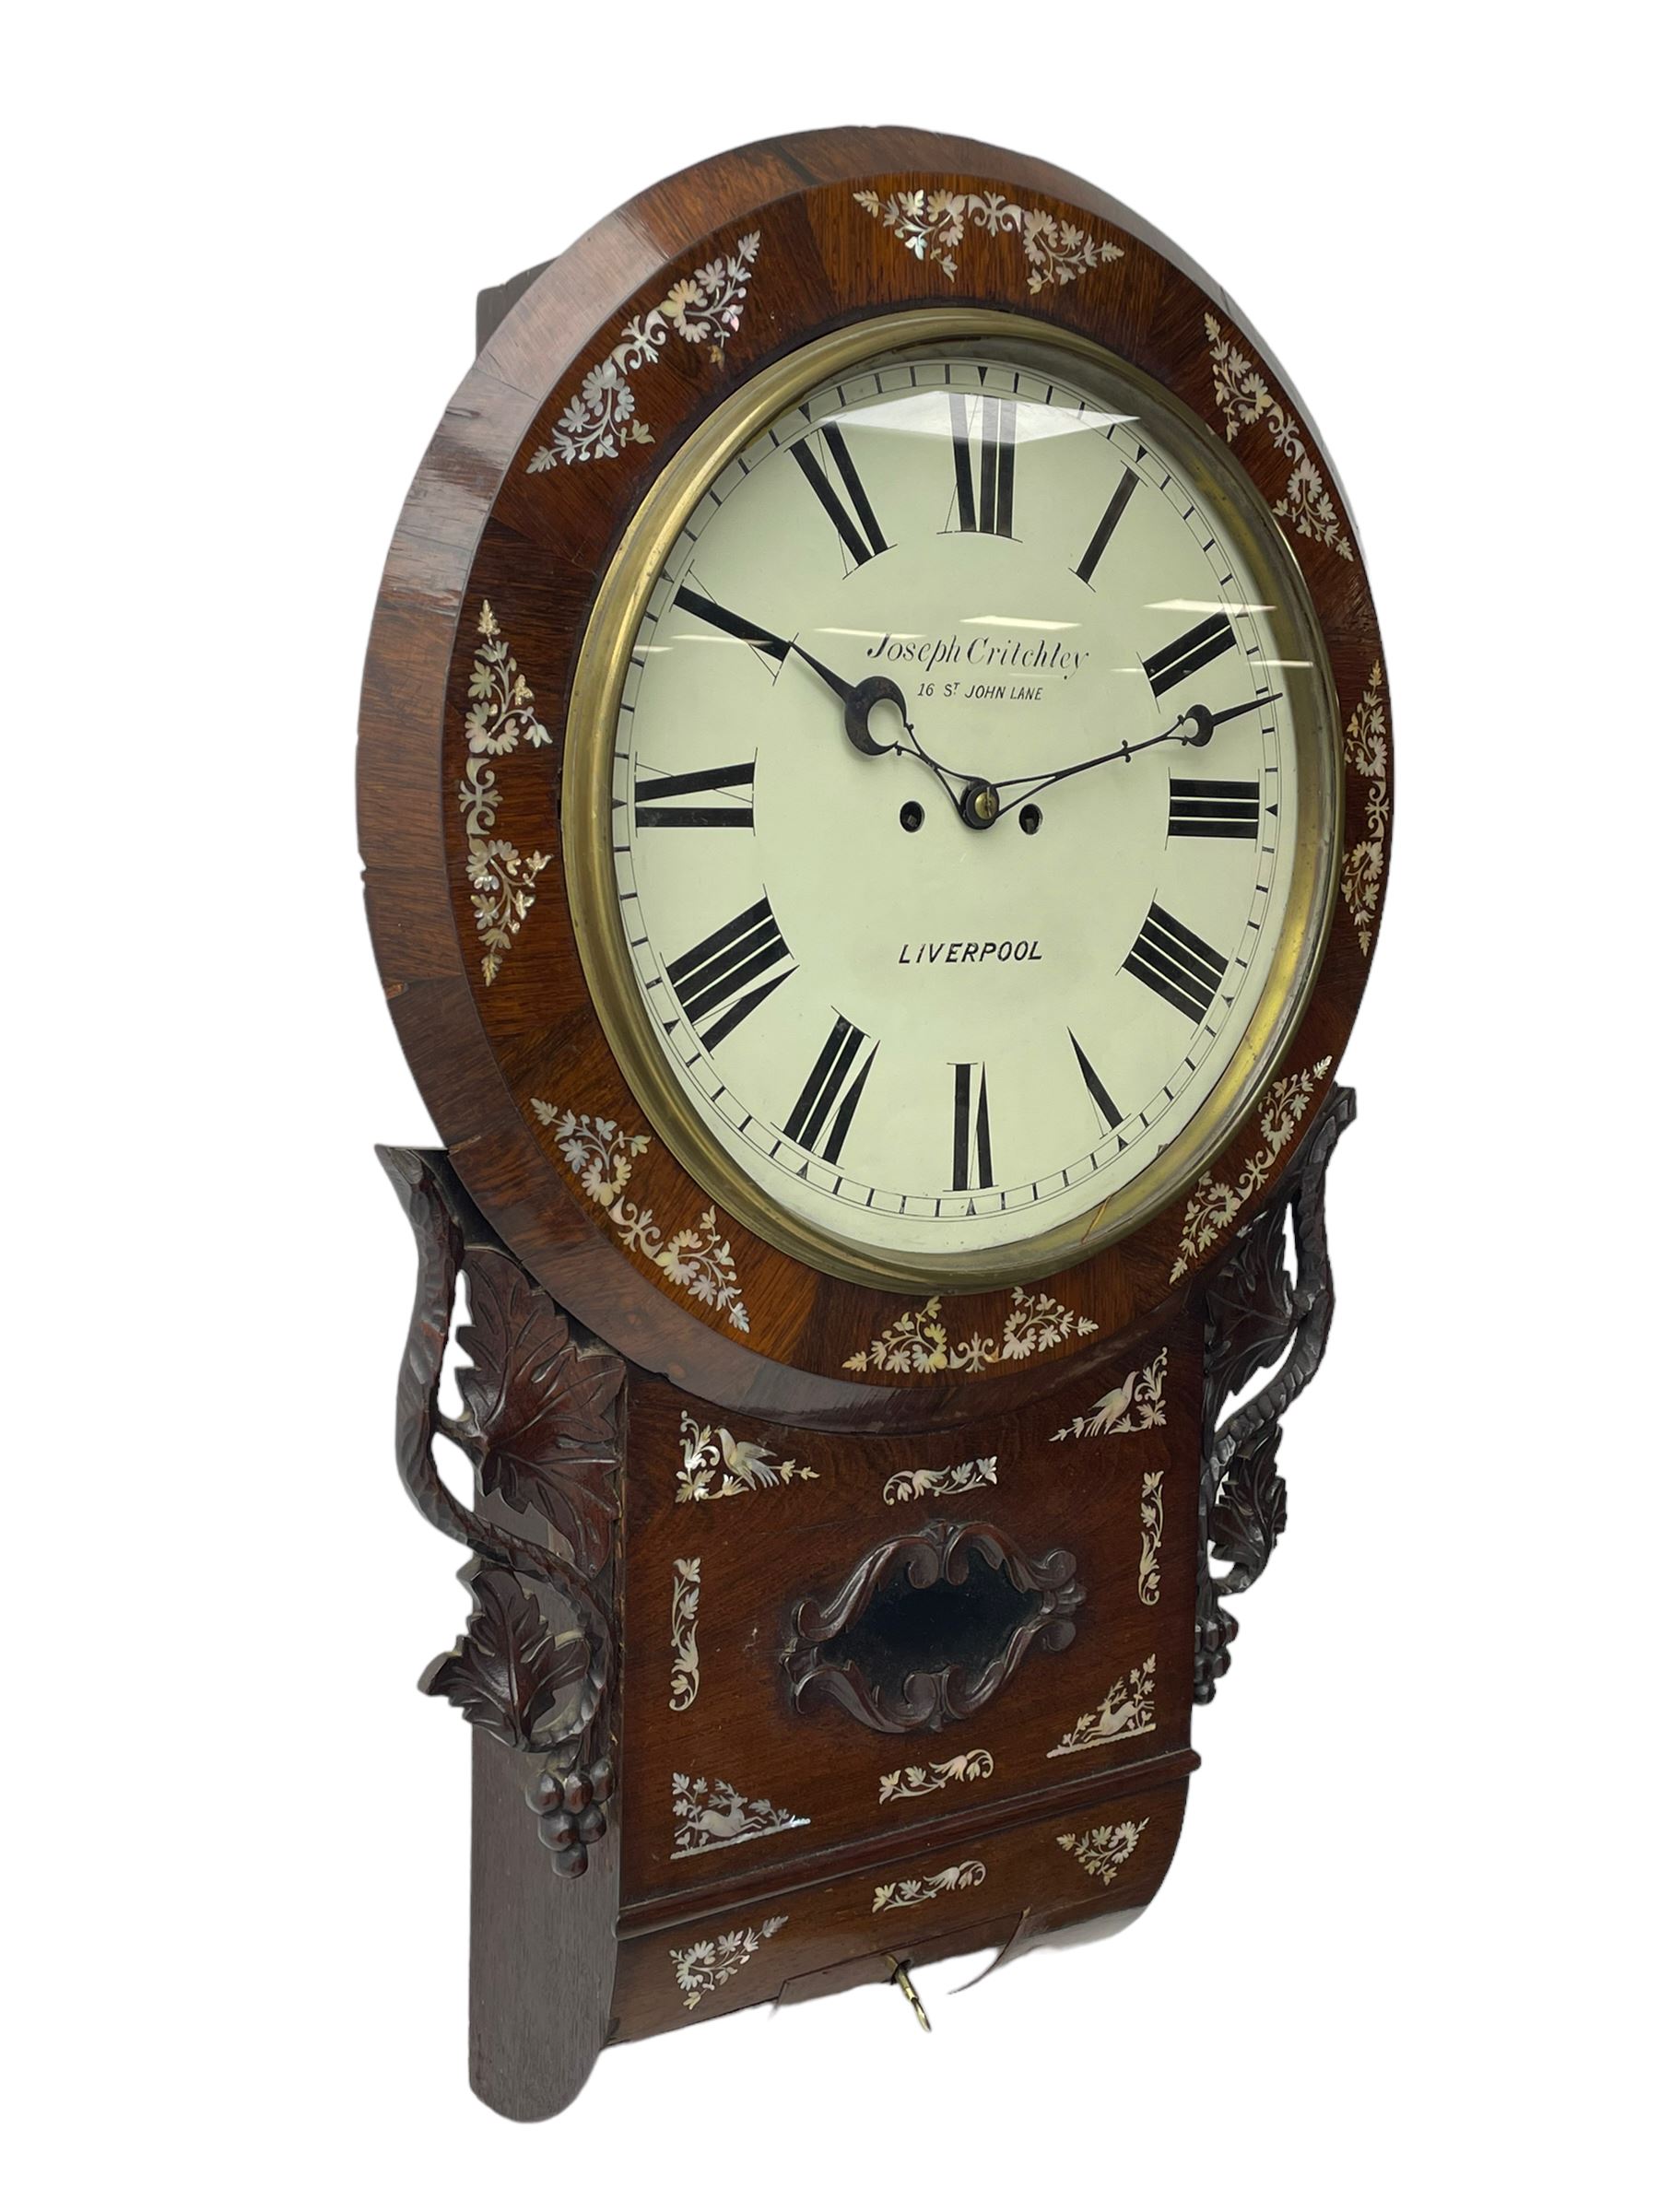 Joseph Critchley of Liverpool - early 19th century twin fusee 8-day rosewood and mother of pearl in - Image 9 of 17